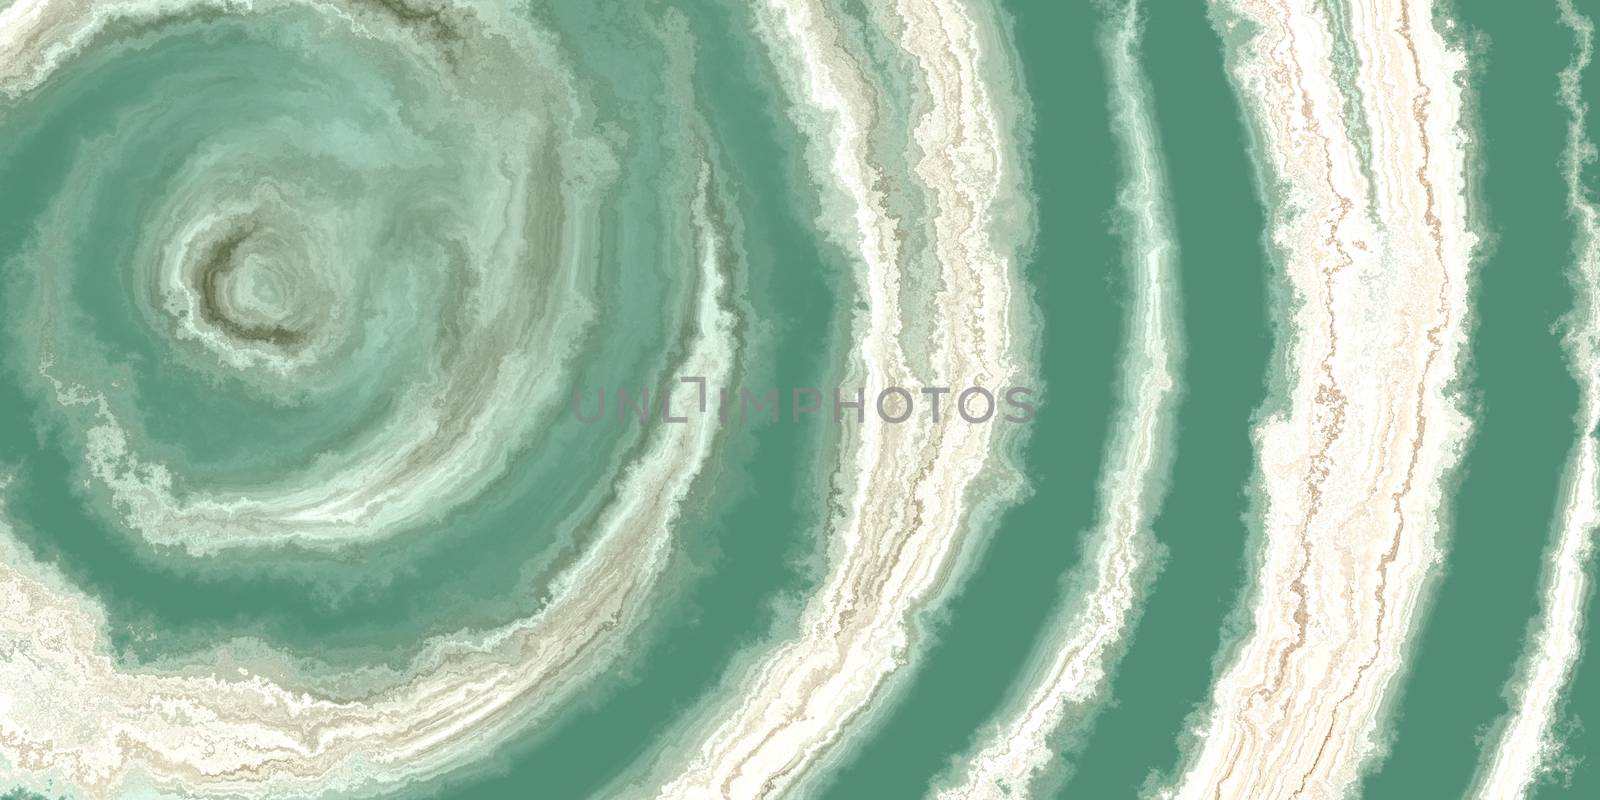 ea Green Agate Mineral Texture. Stripe Circles Stone Pattern Surface Background. by sanches812